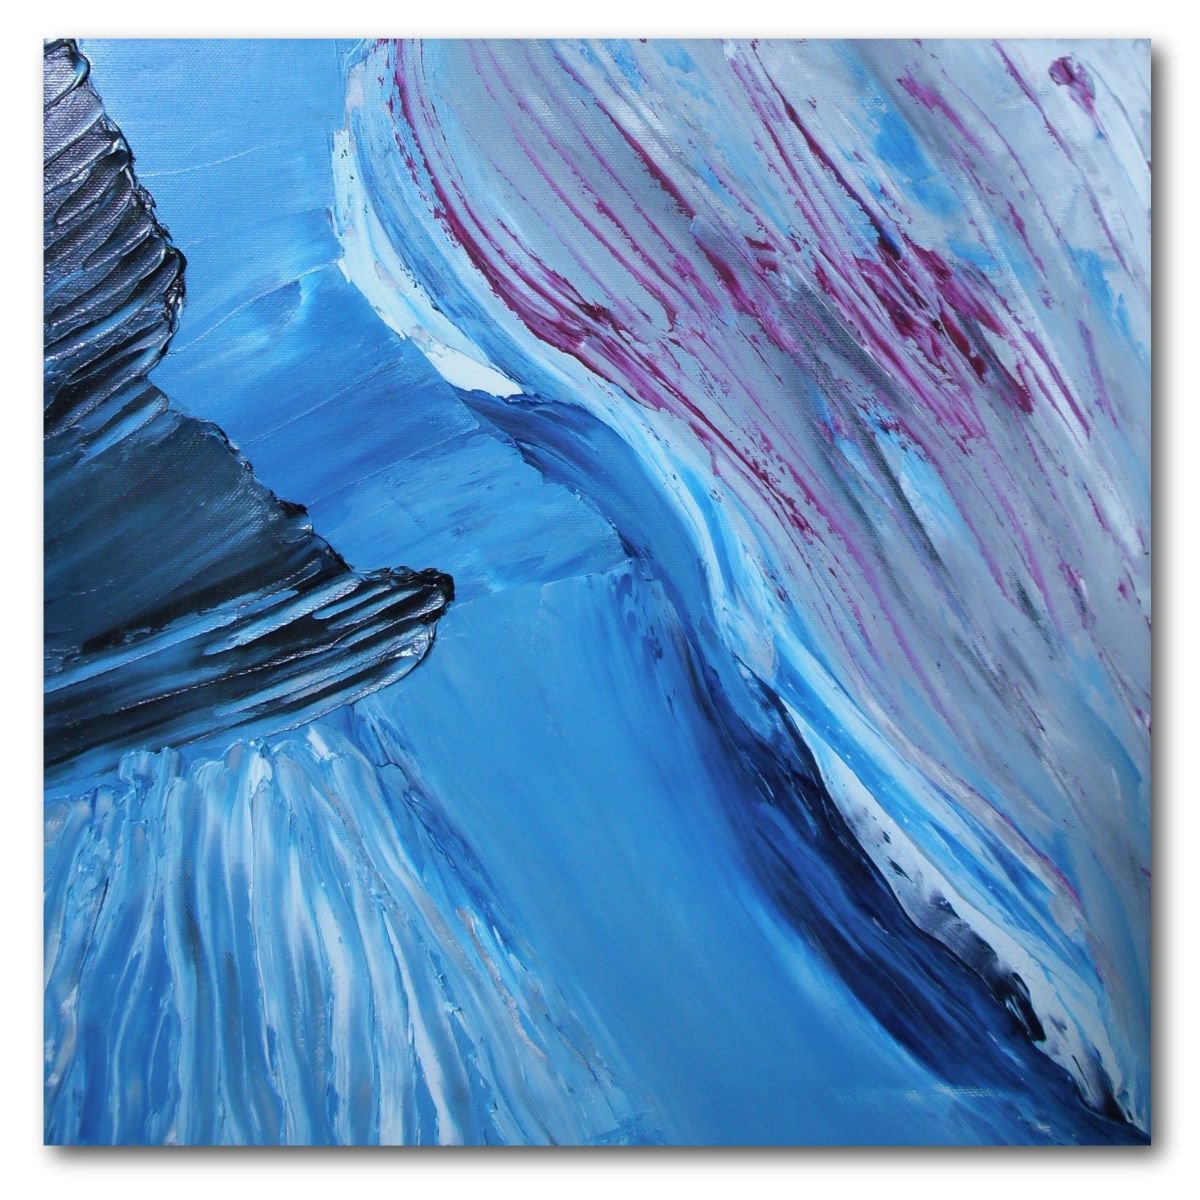 Flooded river - 40x40 cm, Original abstract painting, oil on canvas by Davide De Palma